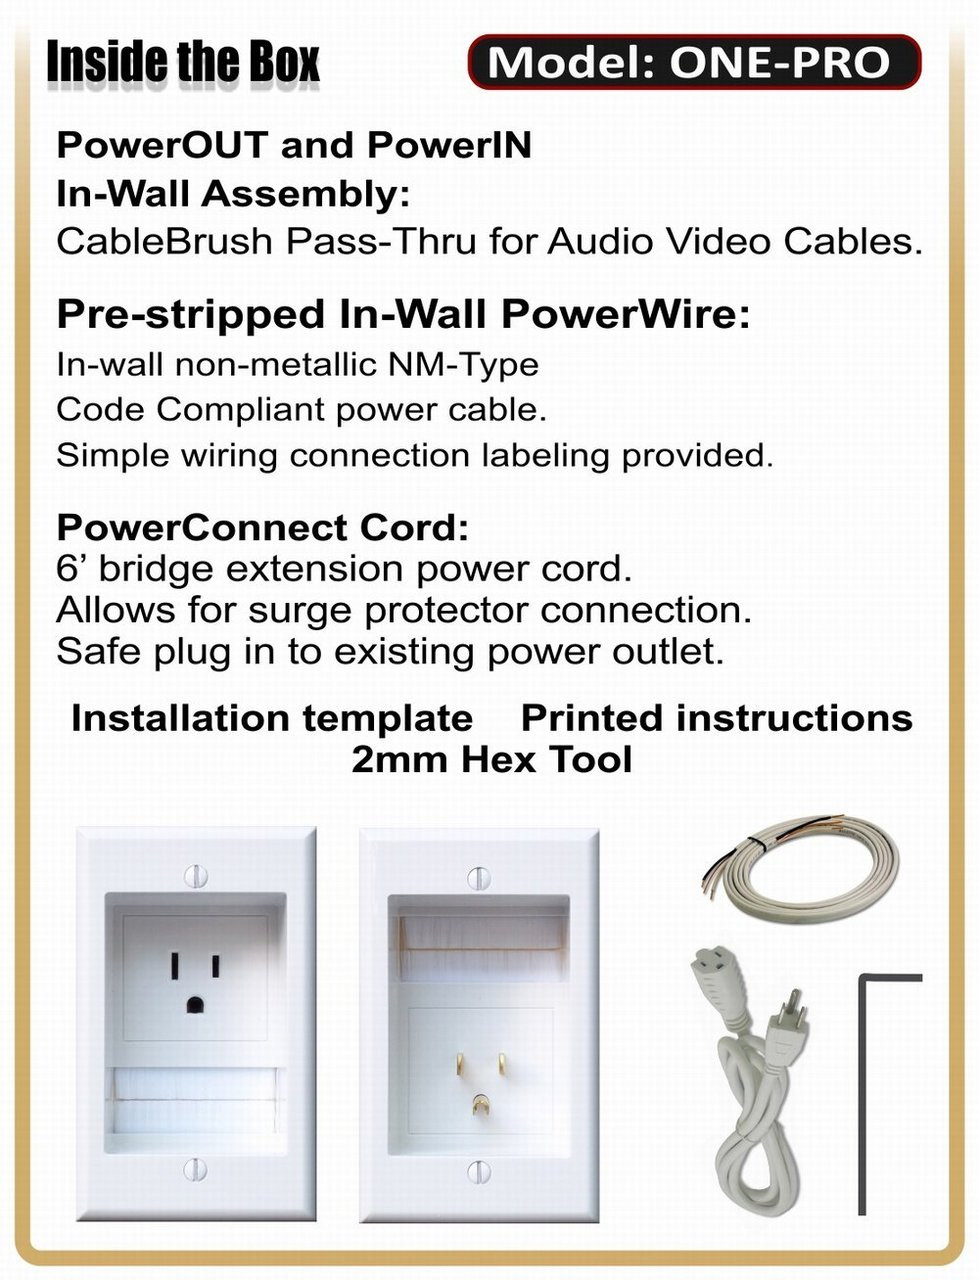 https://cdn11.bigcommerce.com/s-bd95c/images/stencil/1280x1280/products/2770/4300/PowerBridge_Solutions_ONE_PRO_Cable_Management_System_for_Wall_Mounted_TVs_in_the_box__89450.1393639046.jpg?c=2?imbypass=on